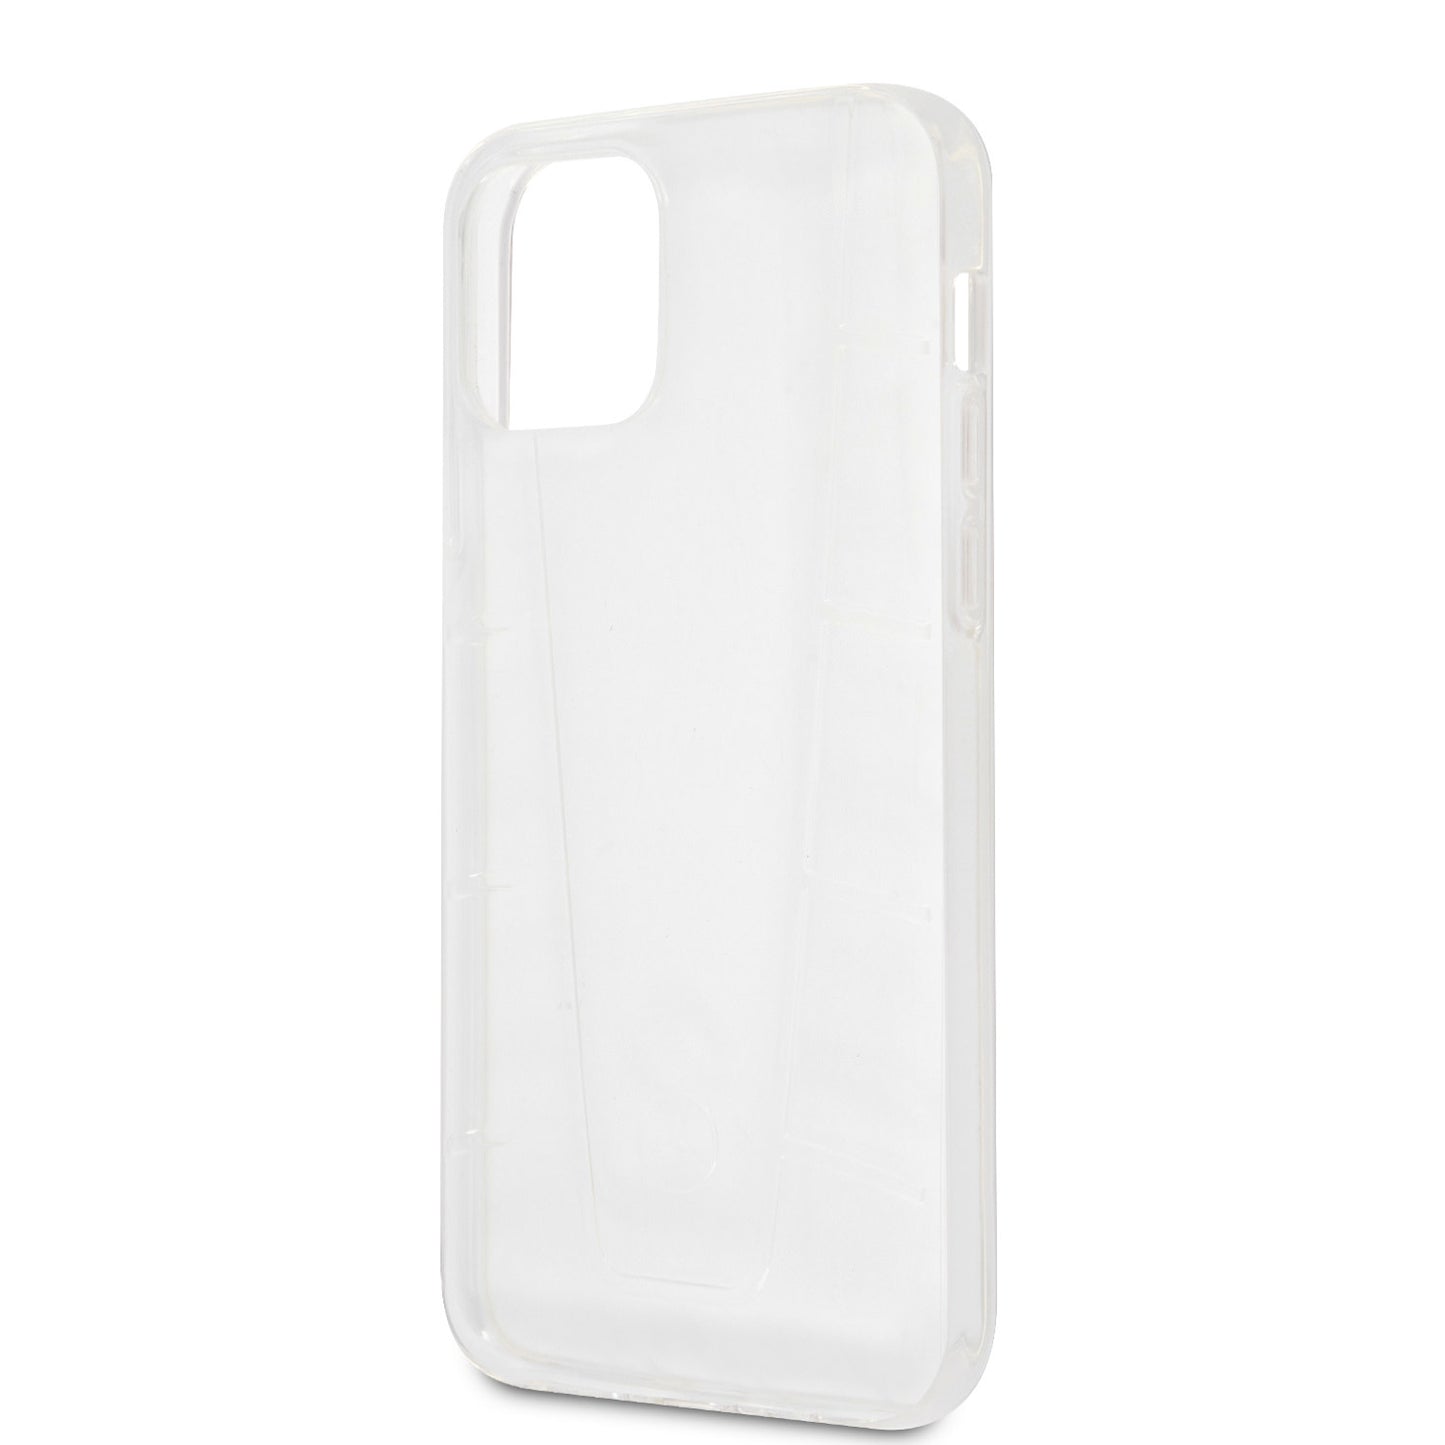 Mercedes-Benz iPhone 12/12 PRO Backcover - Transparant